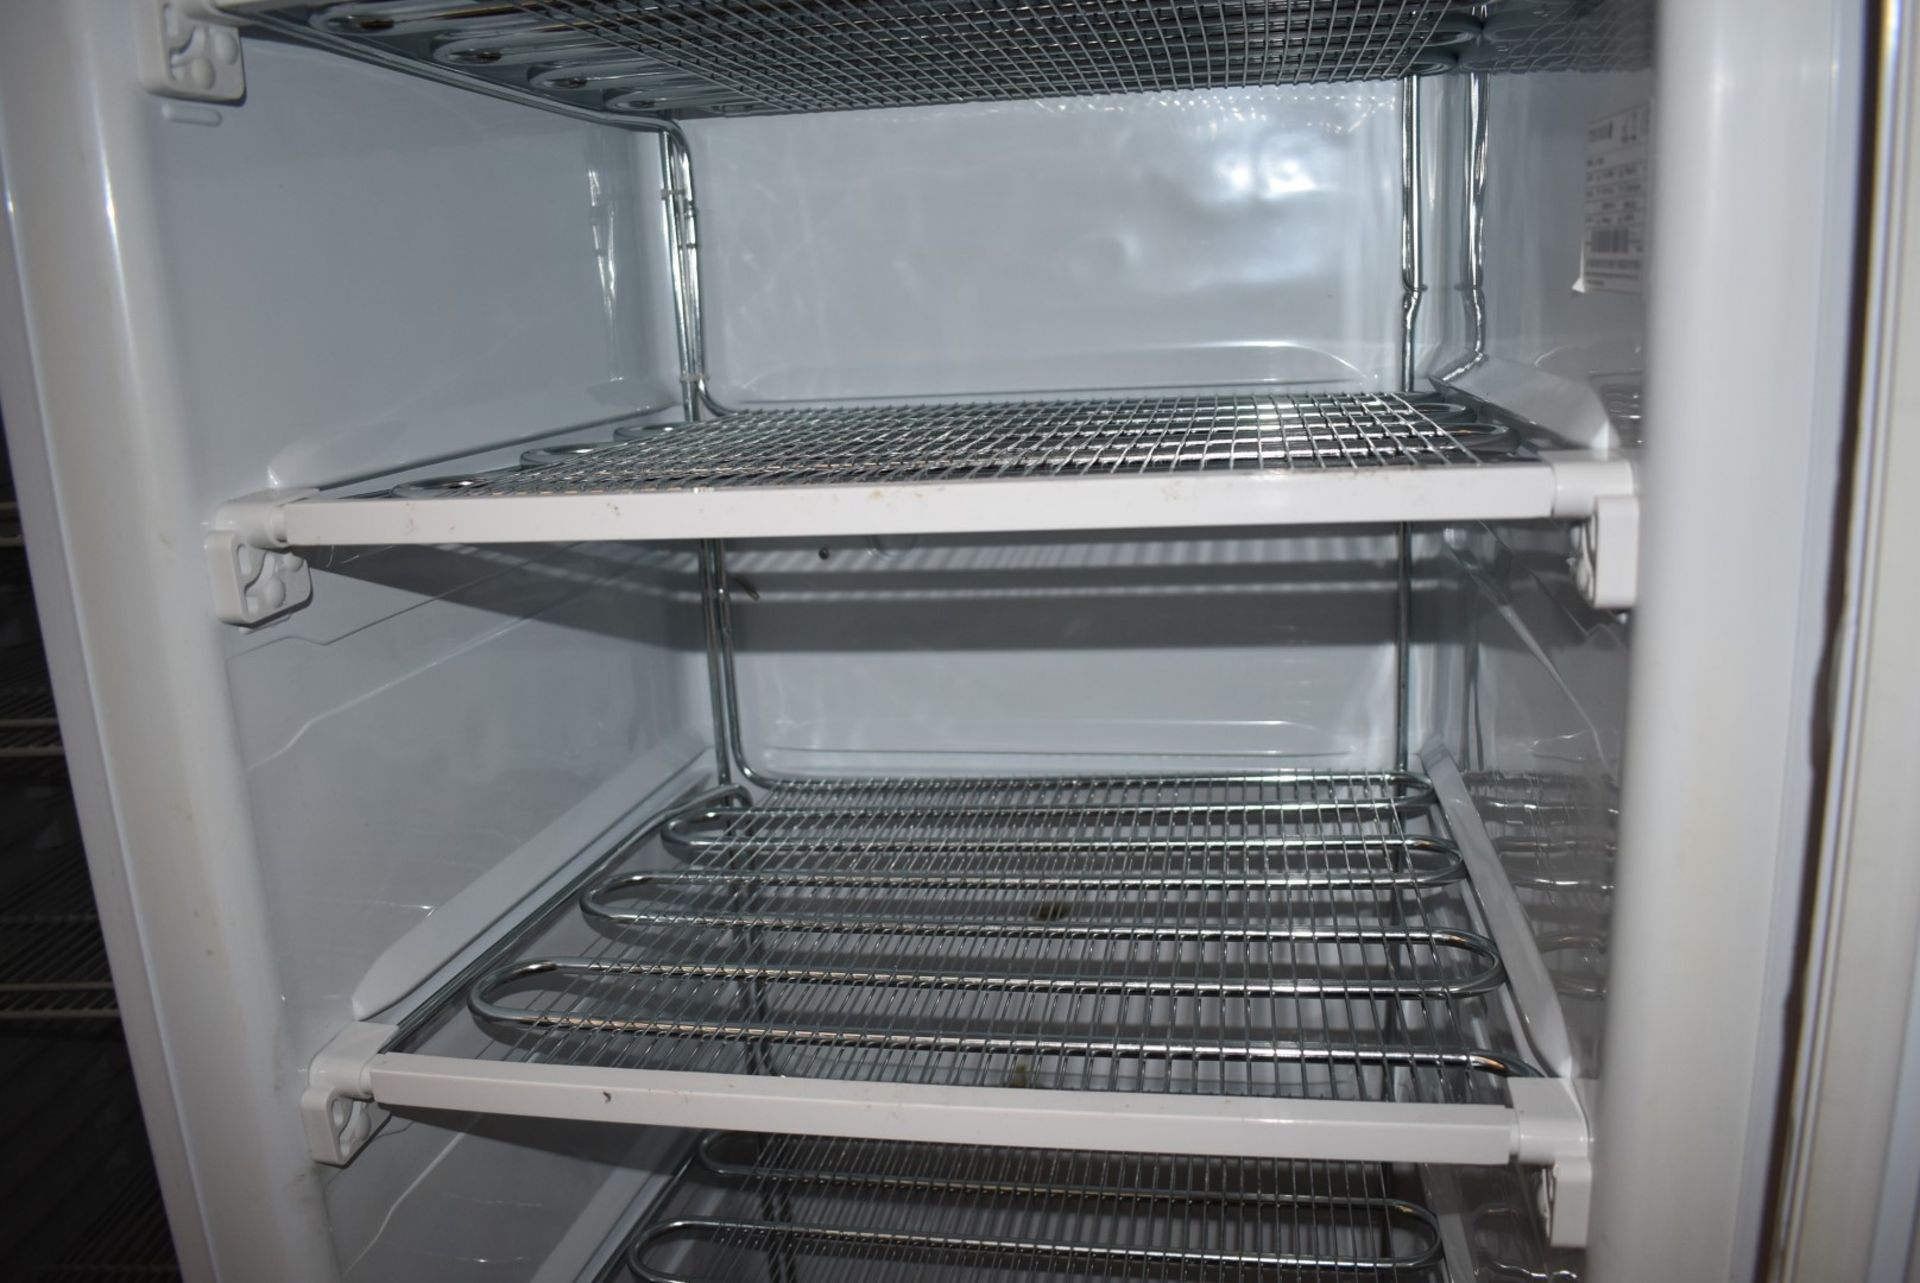 1 x Tefcold UF1380 Upright Commercial Freezer - RRP £800 - CL011 - Ref GCA516 WH5 - Location: - Image 6 of 7